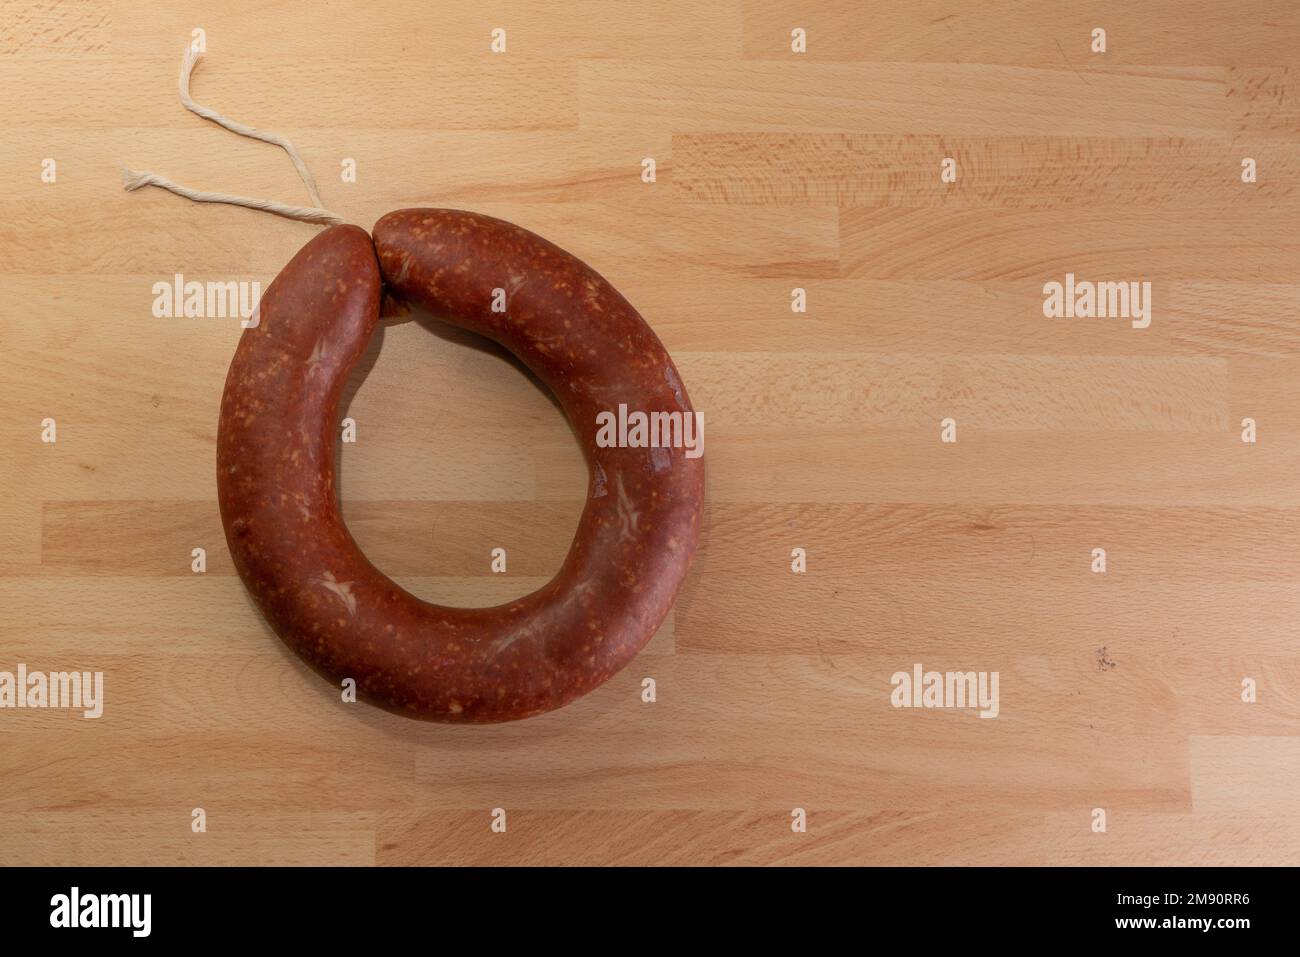 Top view of fermented circular traditional sausage on wooden background with text area. Stock Photo